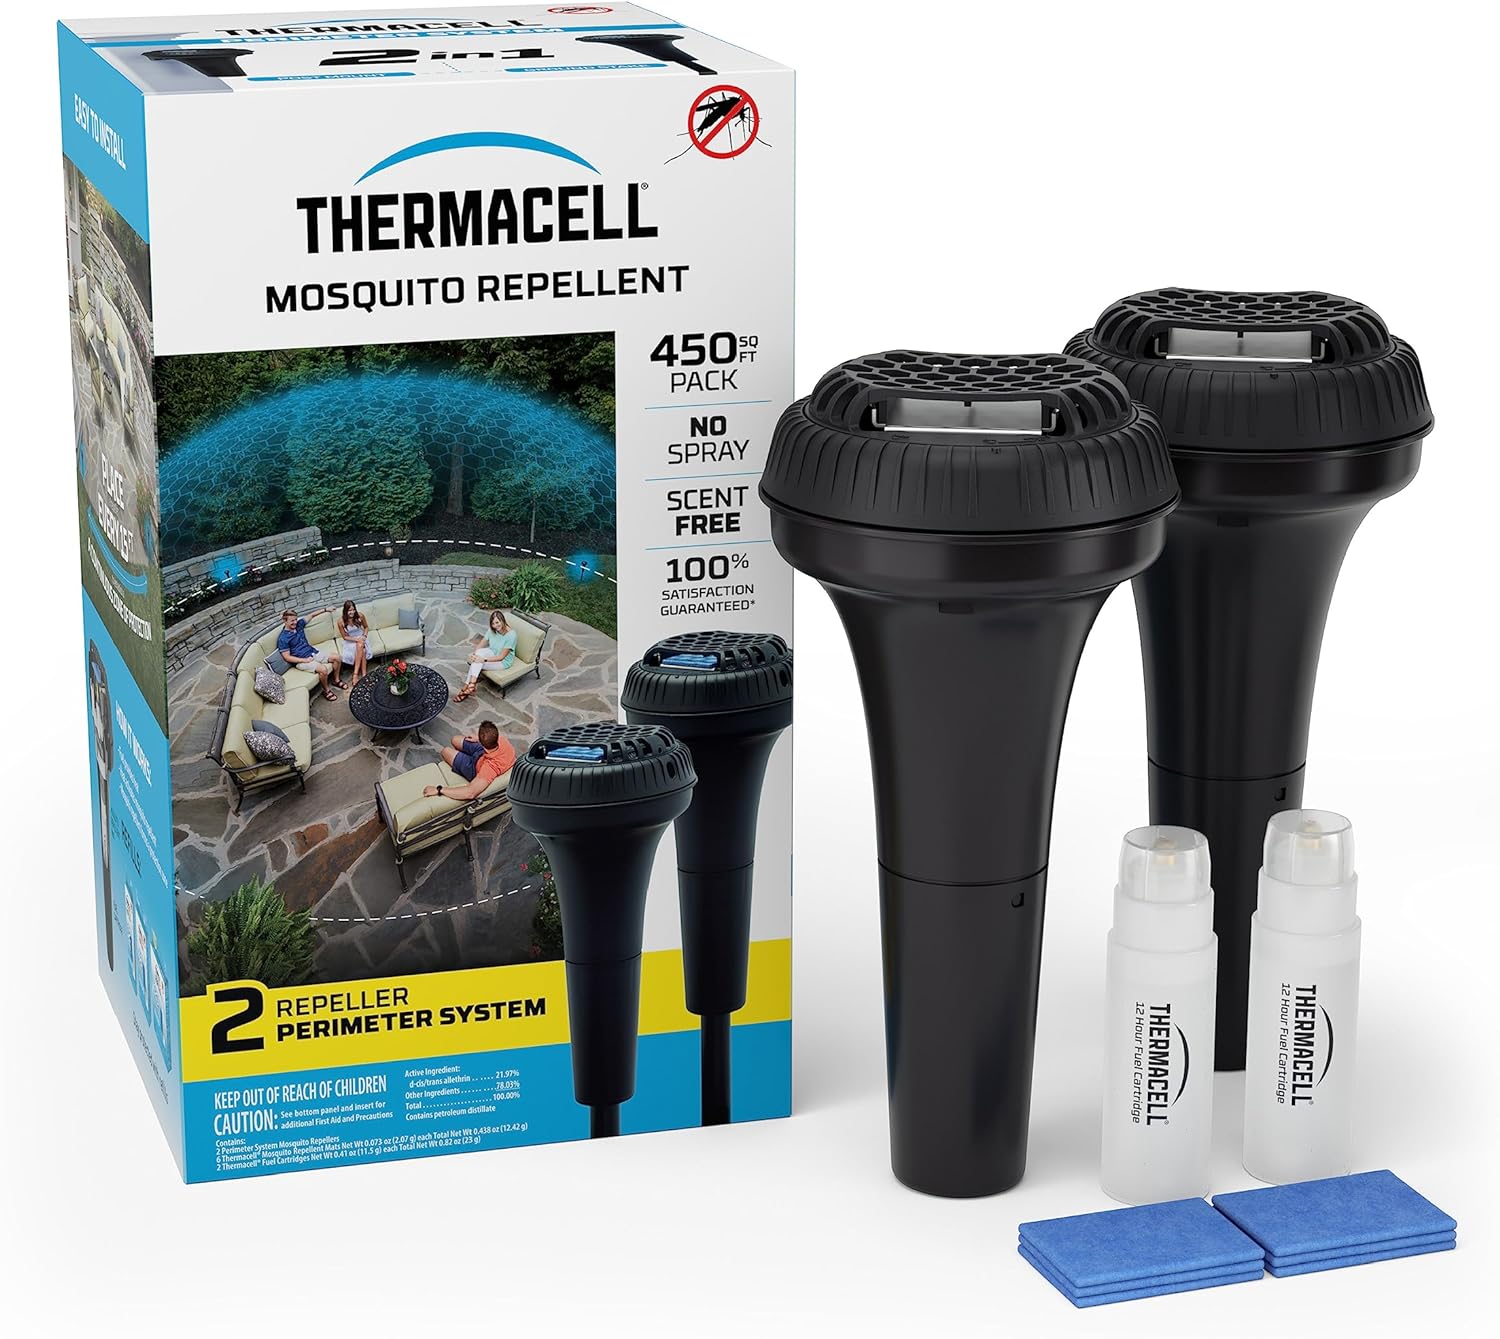 Thermacell Mosquito Repellent Perimeter System; Provides Mosquito Protection for Patios, Decks and Doorways; No Open Flame, Scent Free, Bug Spray Alternative